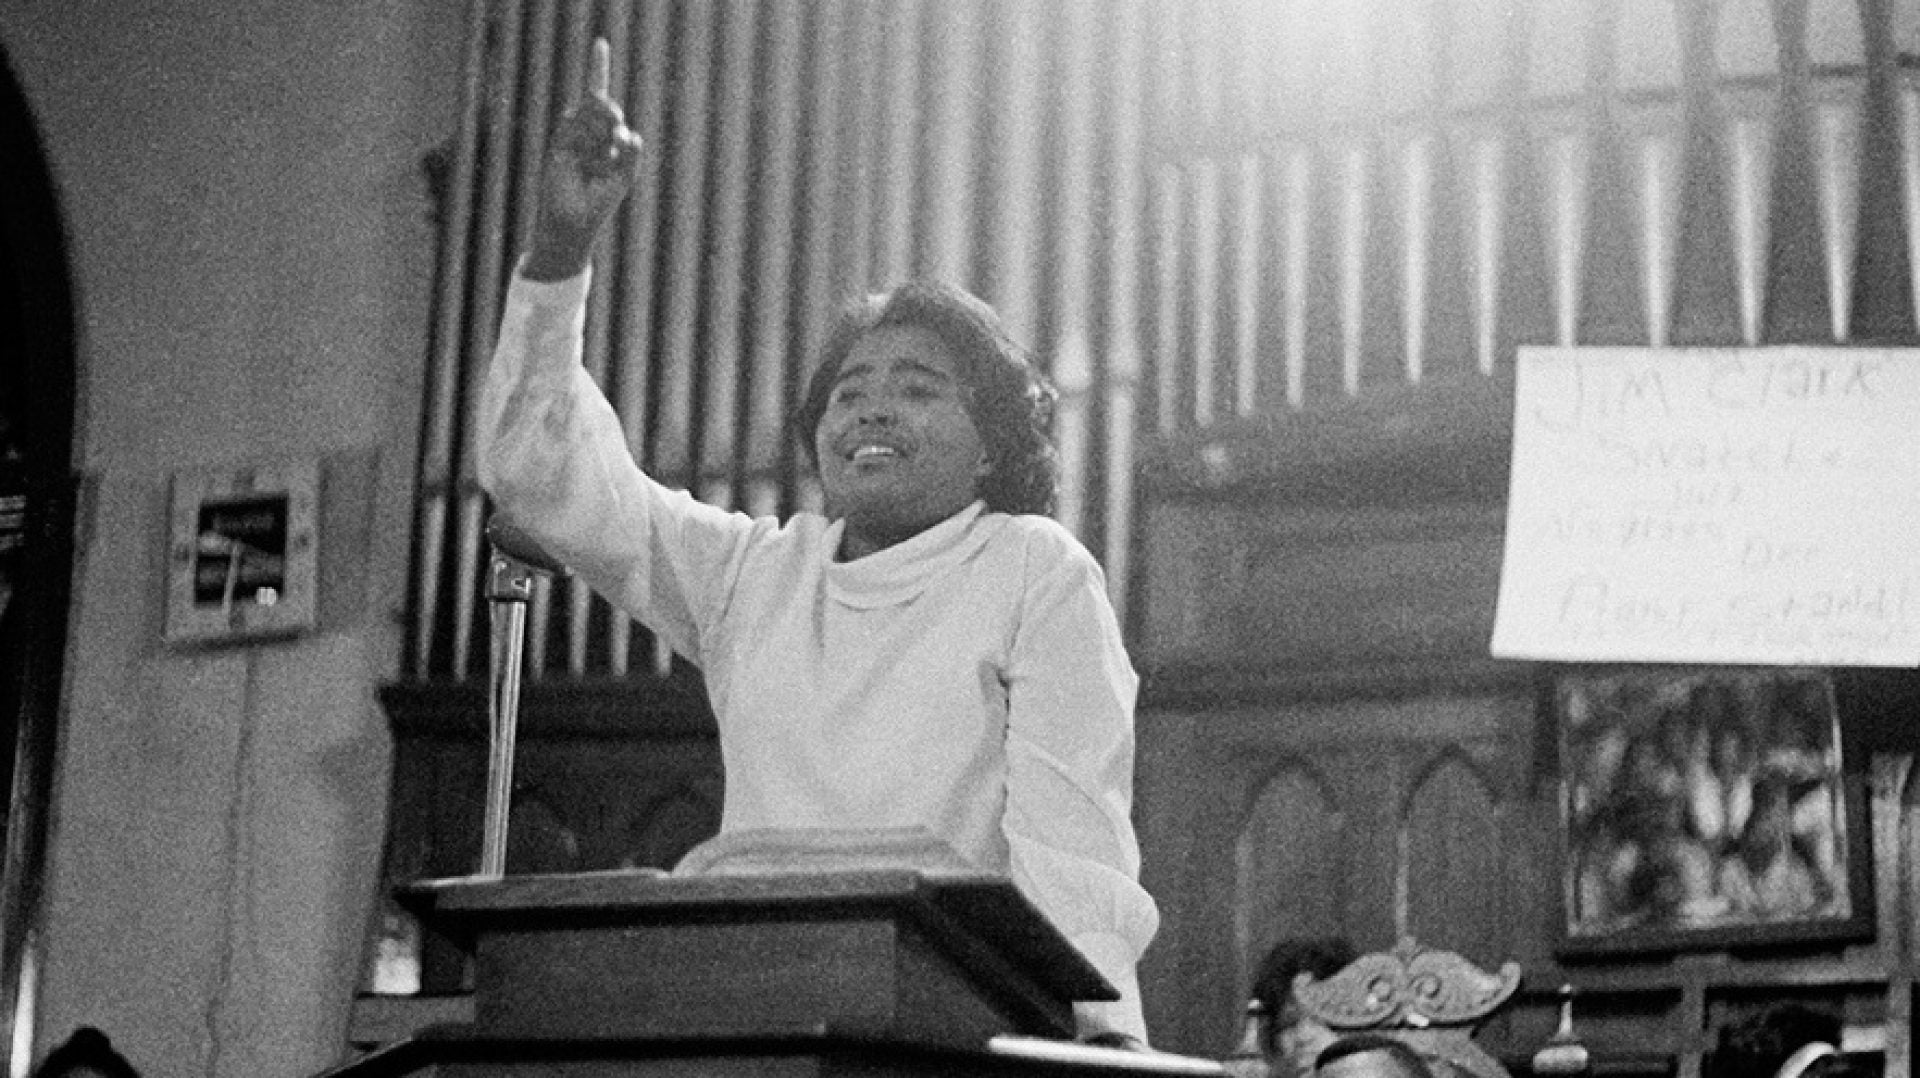 This Black Woman Inspired King's ‘I Have A Dream’ Speech